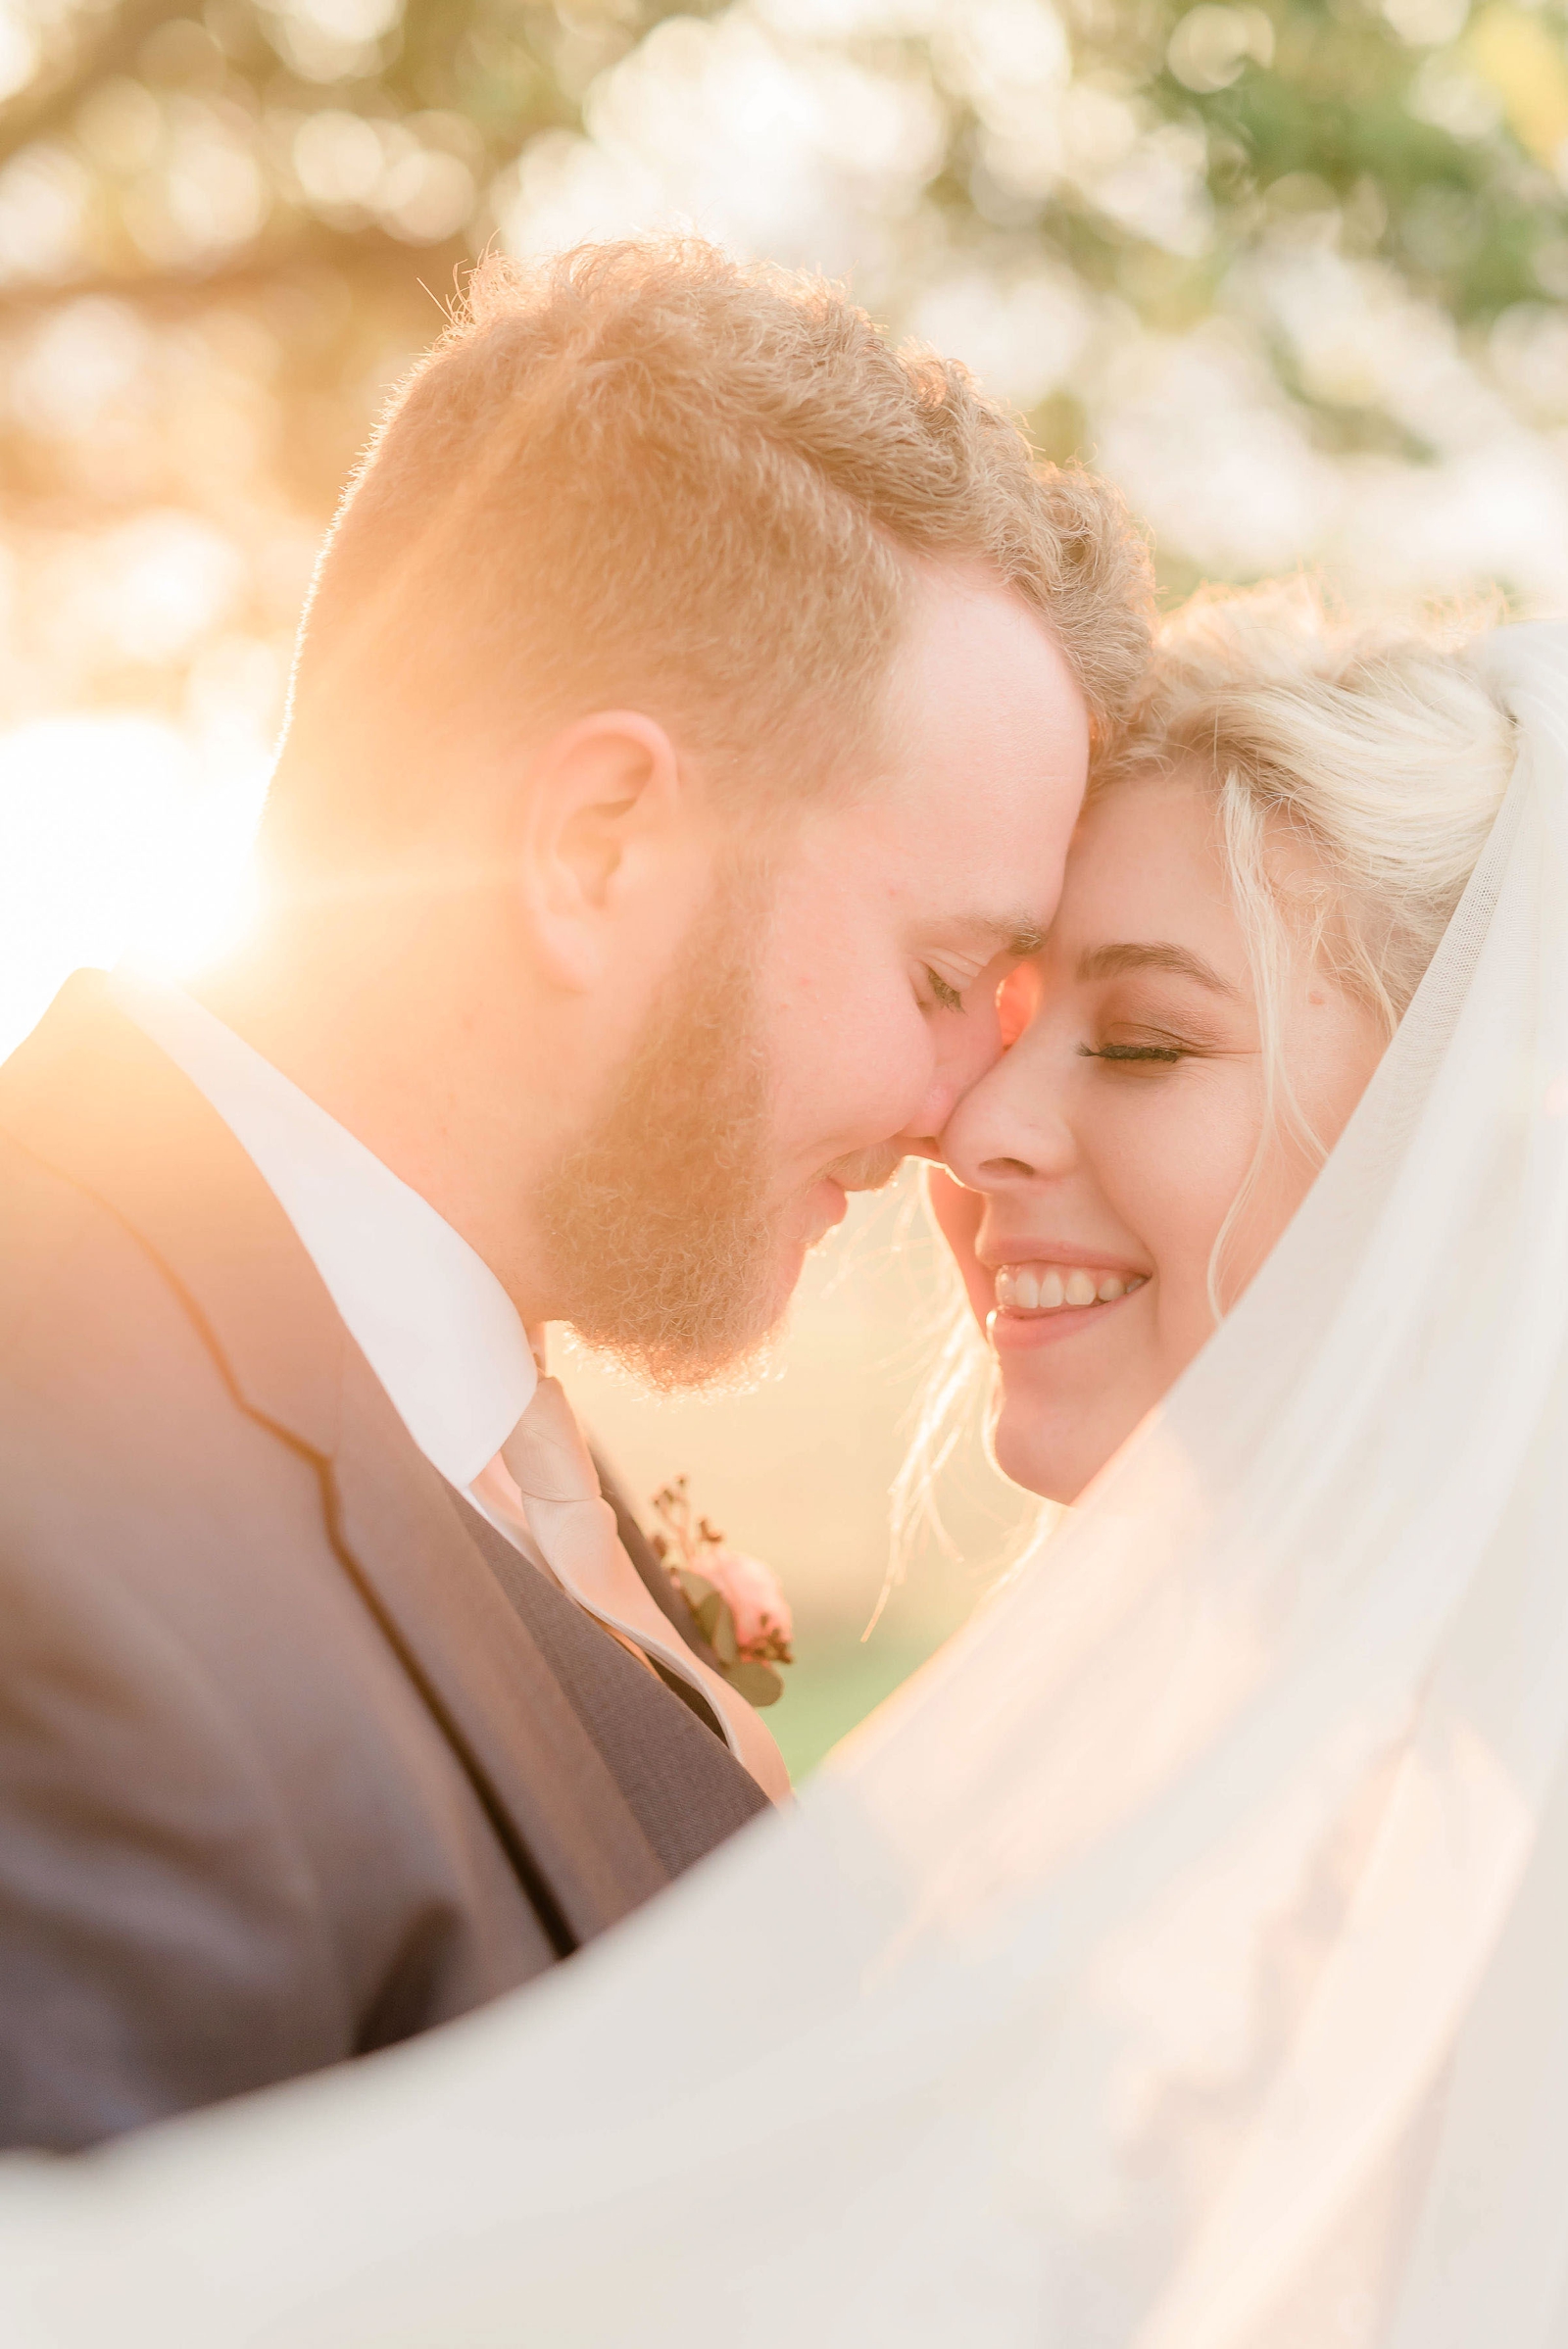 The Benefits Of Sunset Portraits On Your Wedding Day